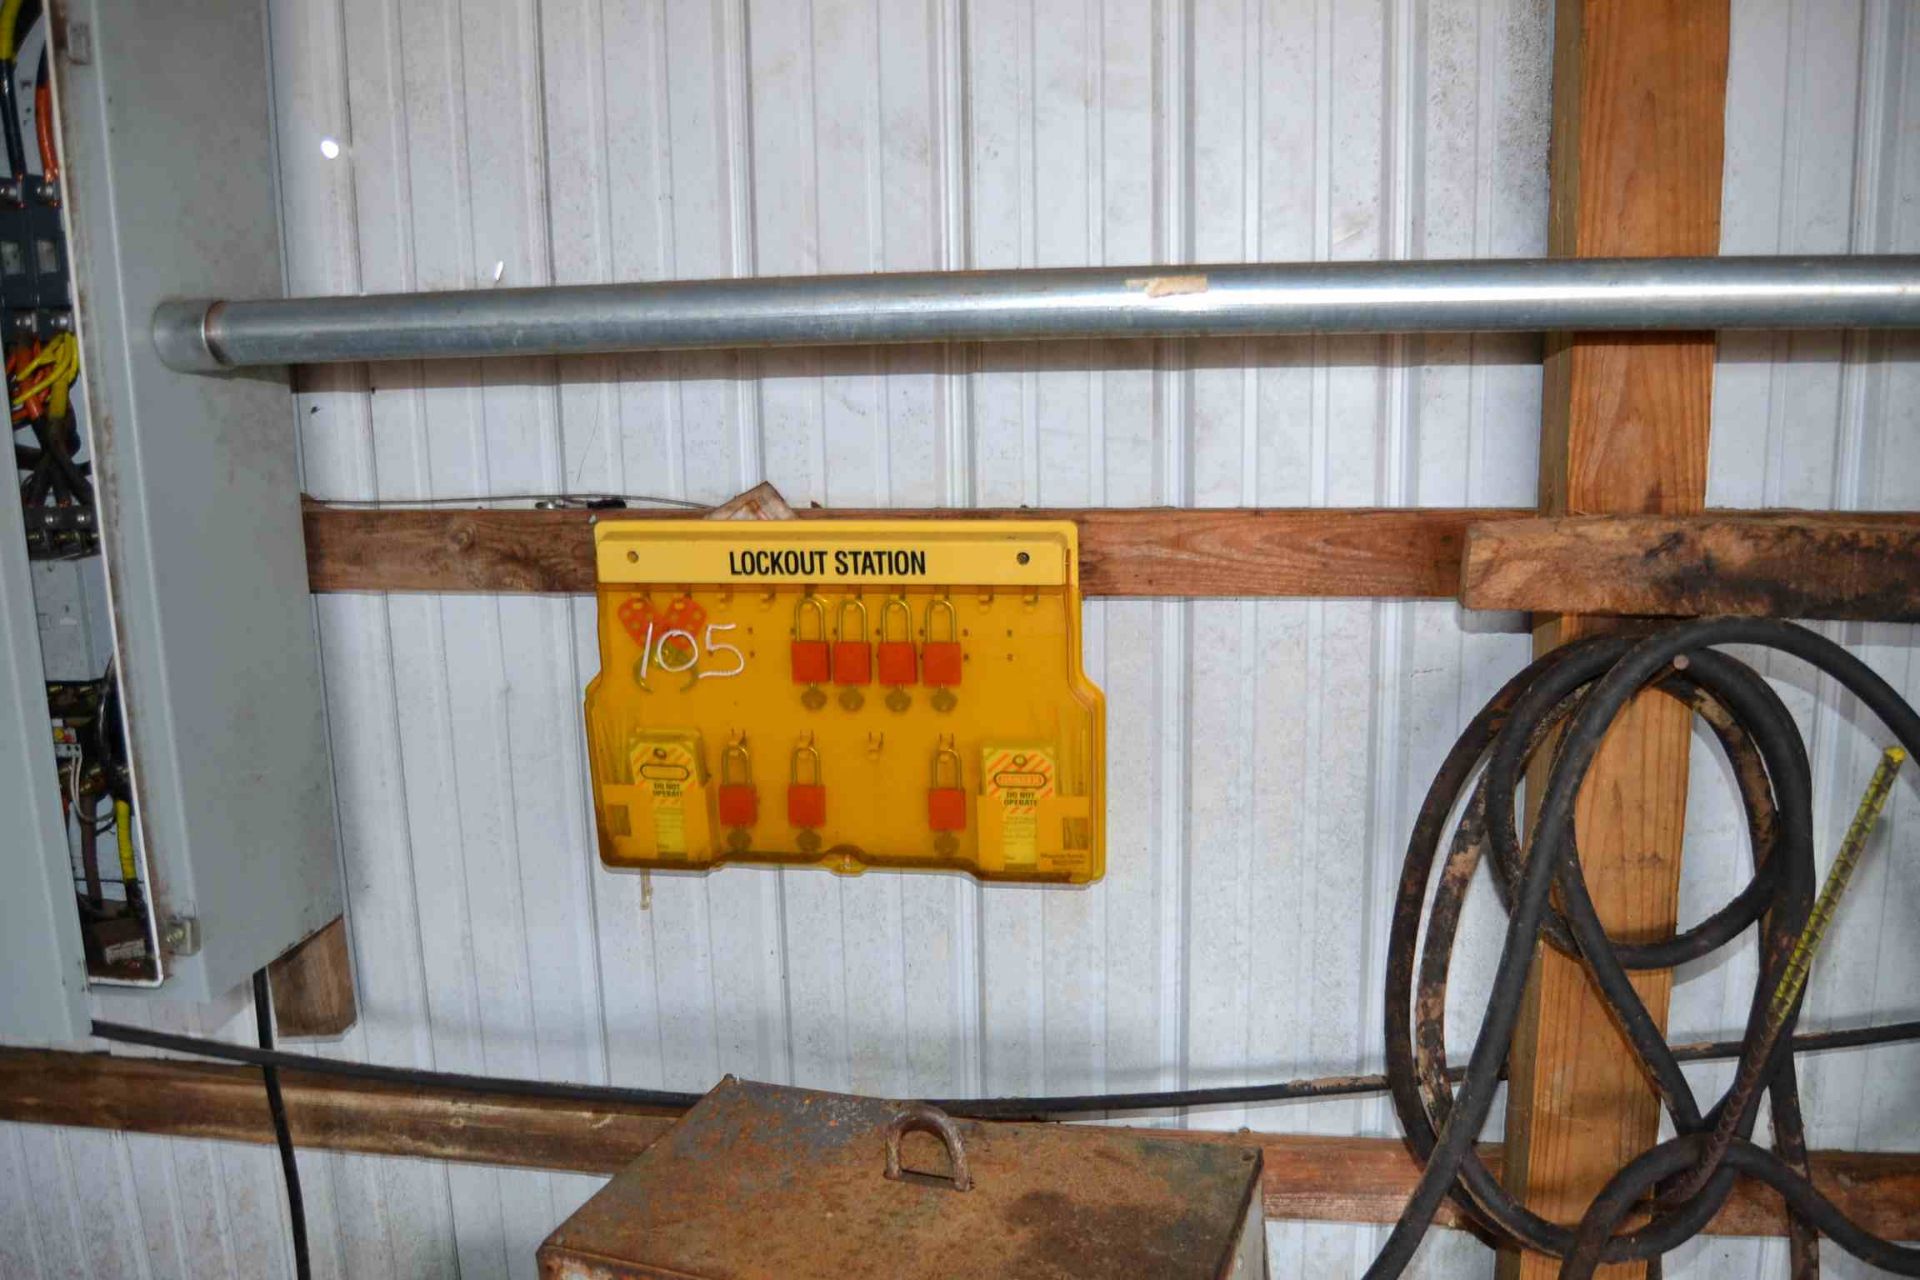 LOCKOUT STATION FOR ELECTRICAL